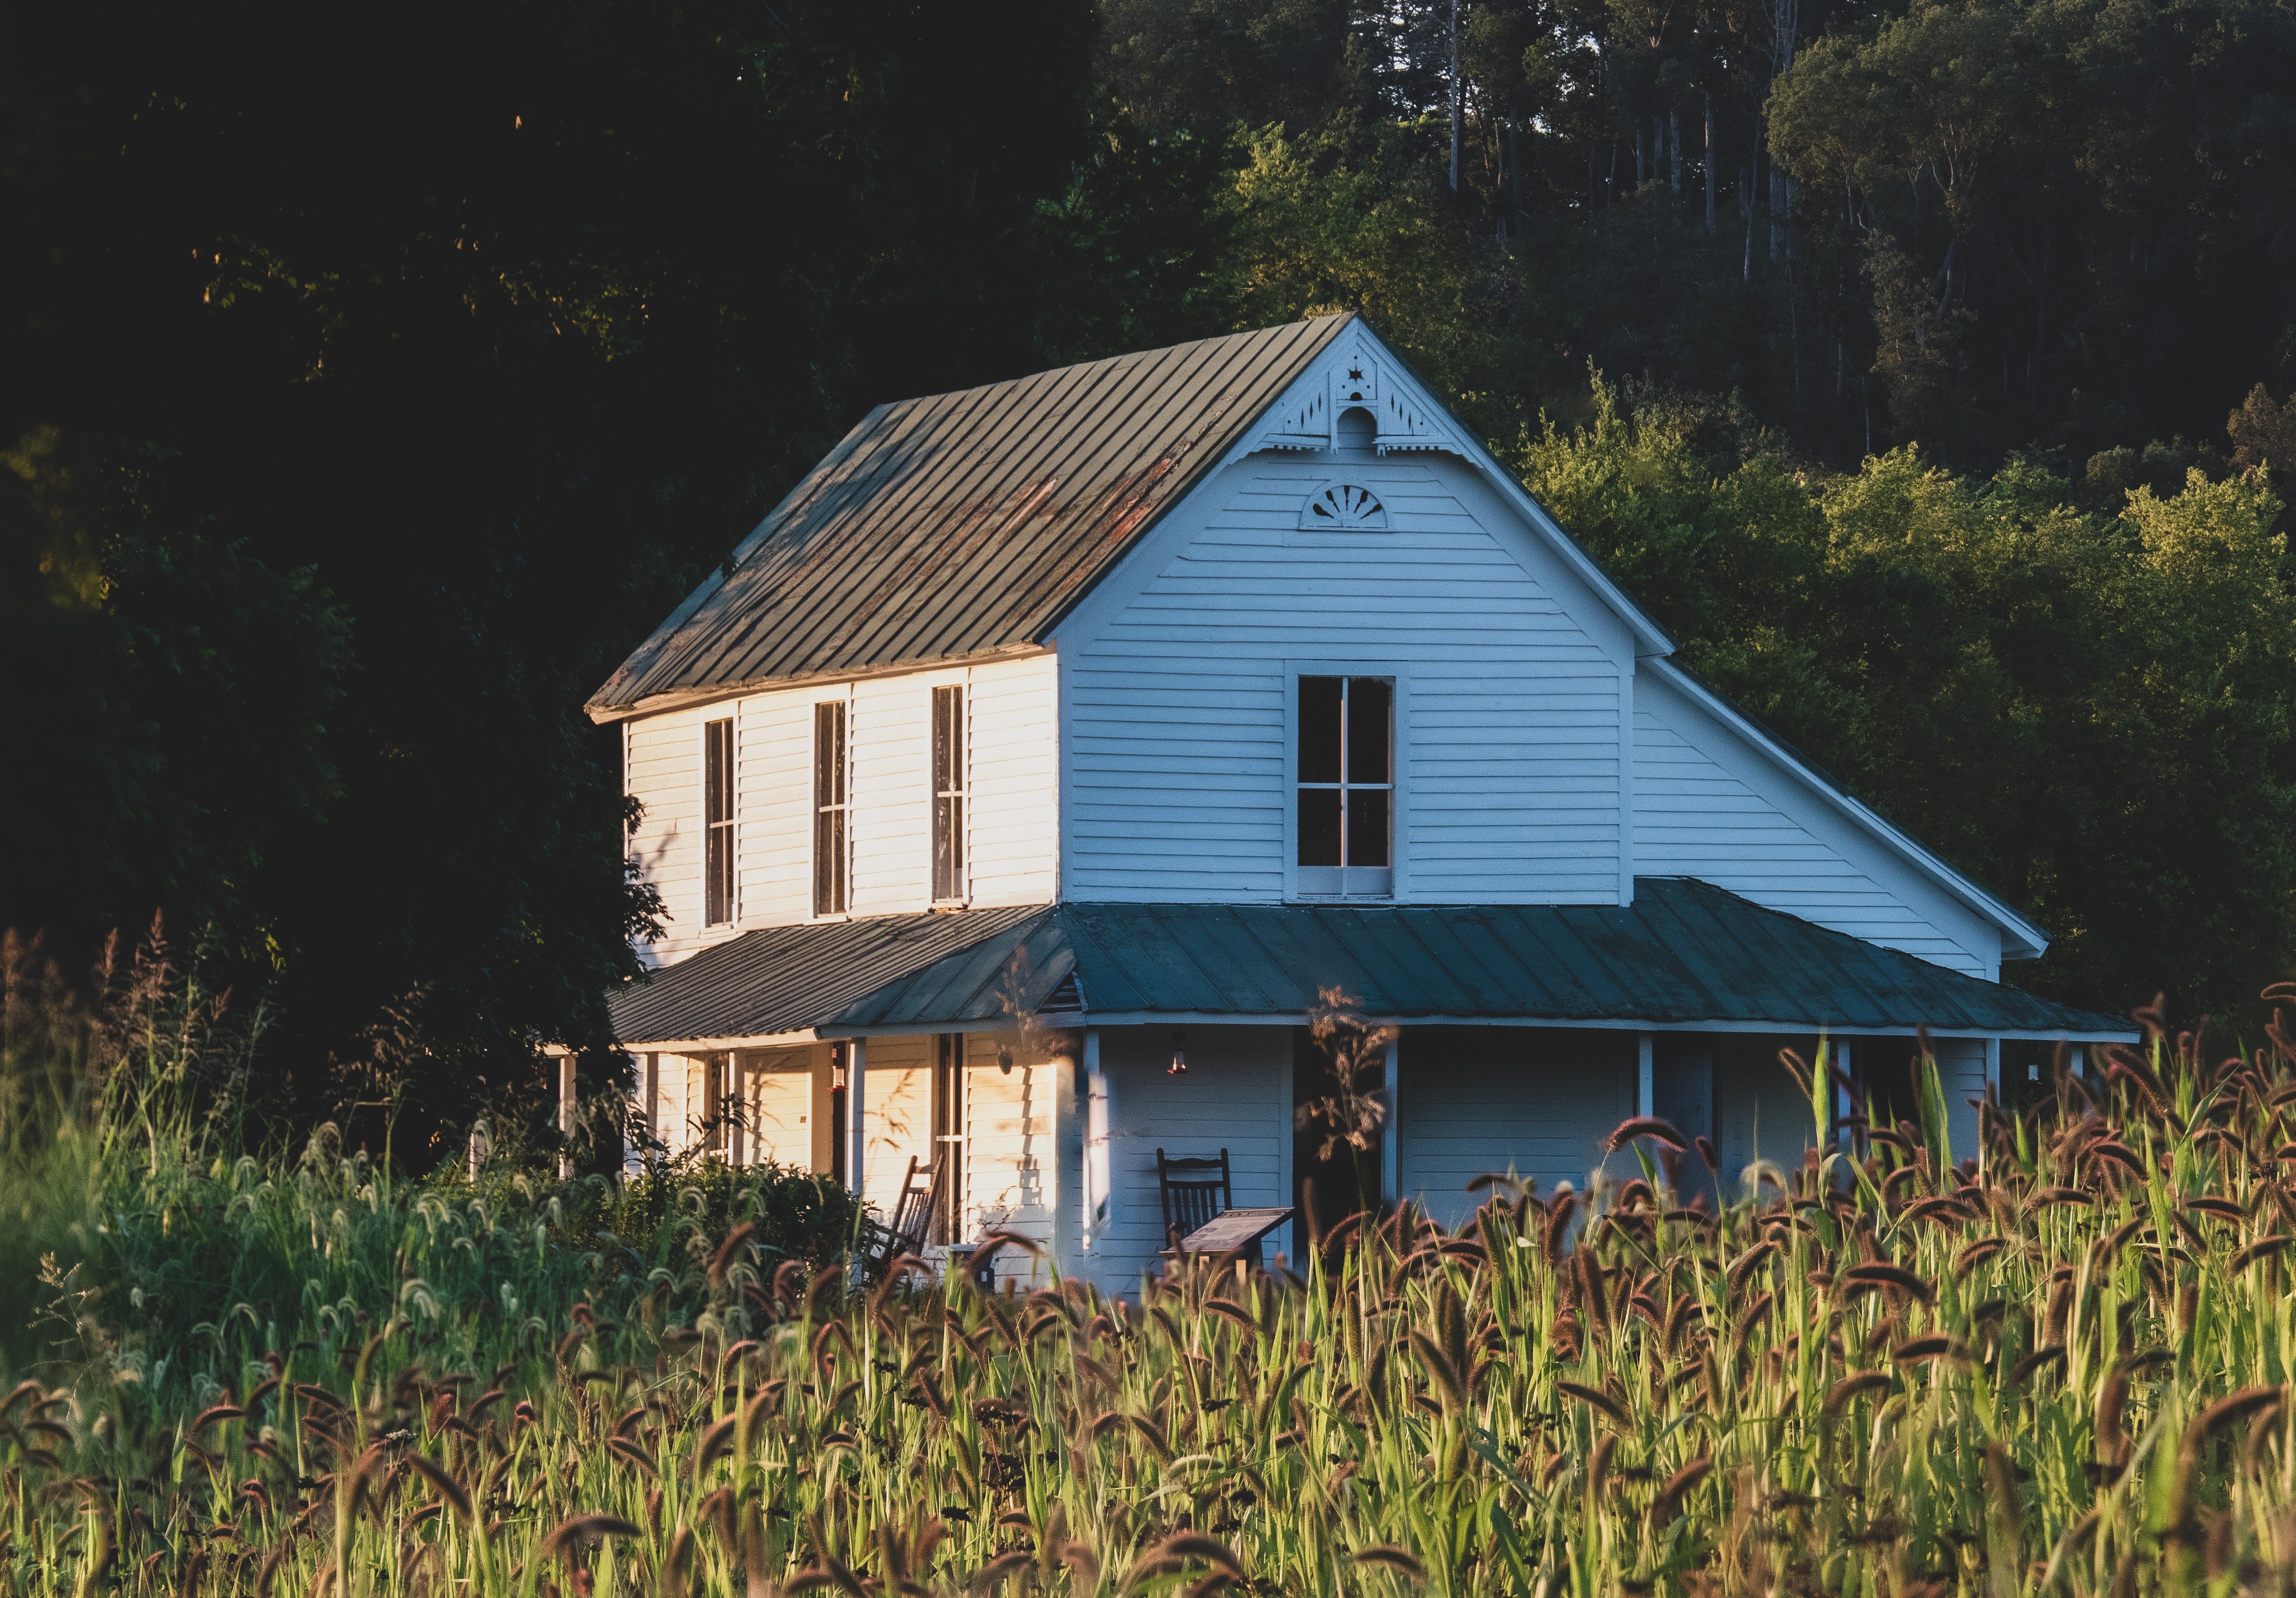 Matthew & the officers traced the address to an old farmhouse. | Source: Unsplash